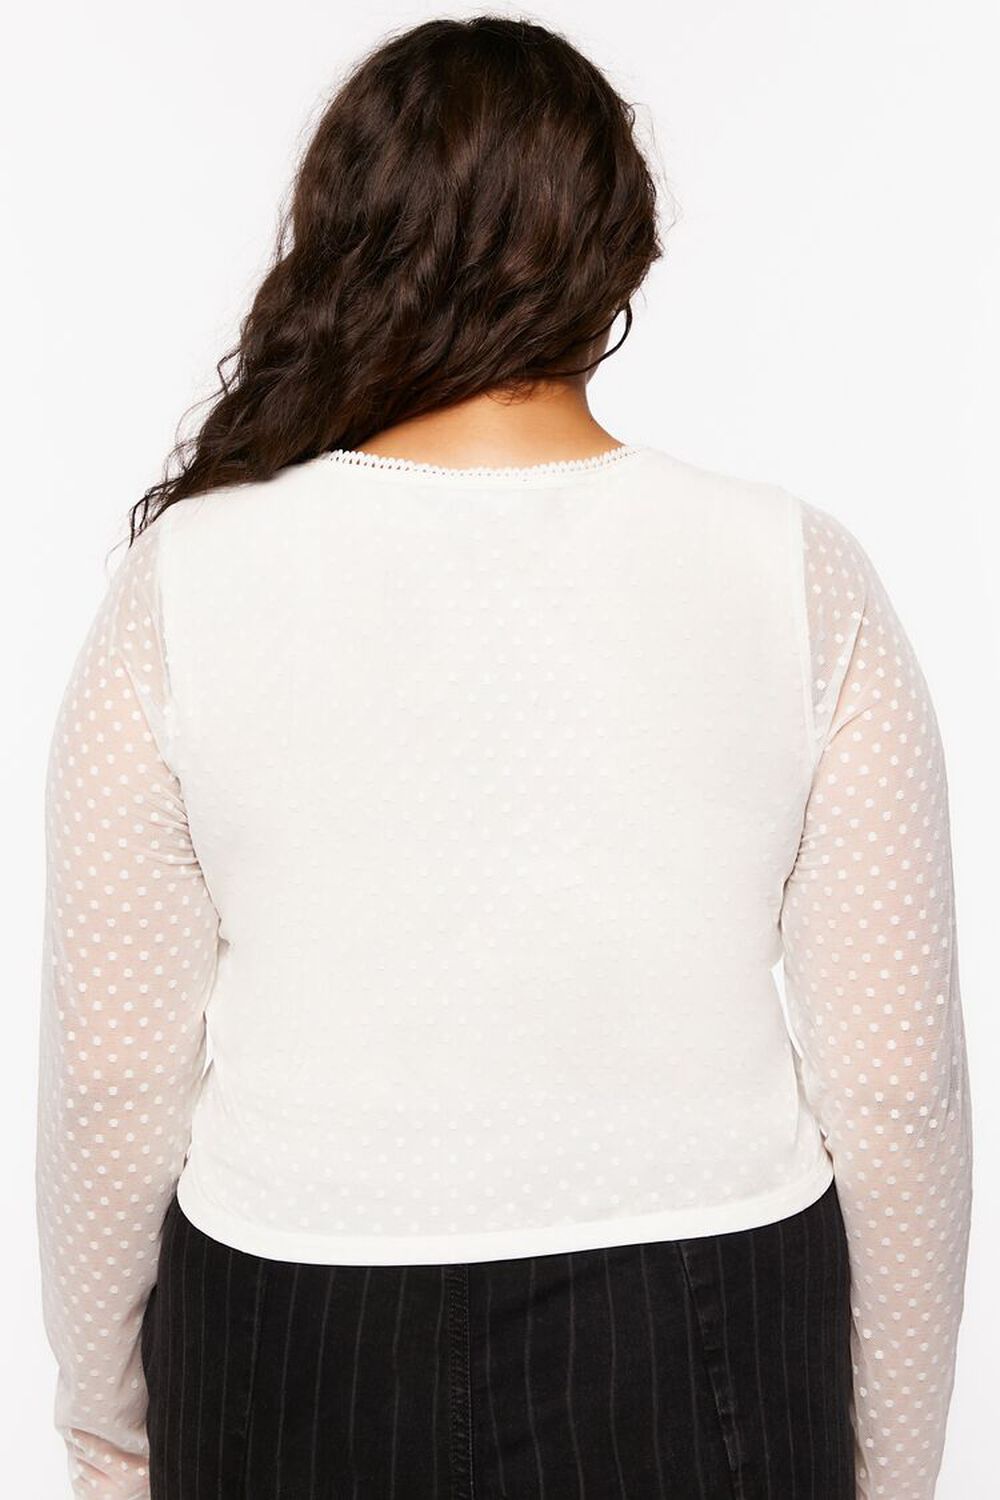 Plus Size Dotted Hook-and-Eye Top, image 3